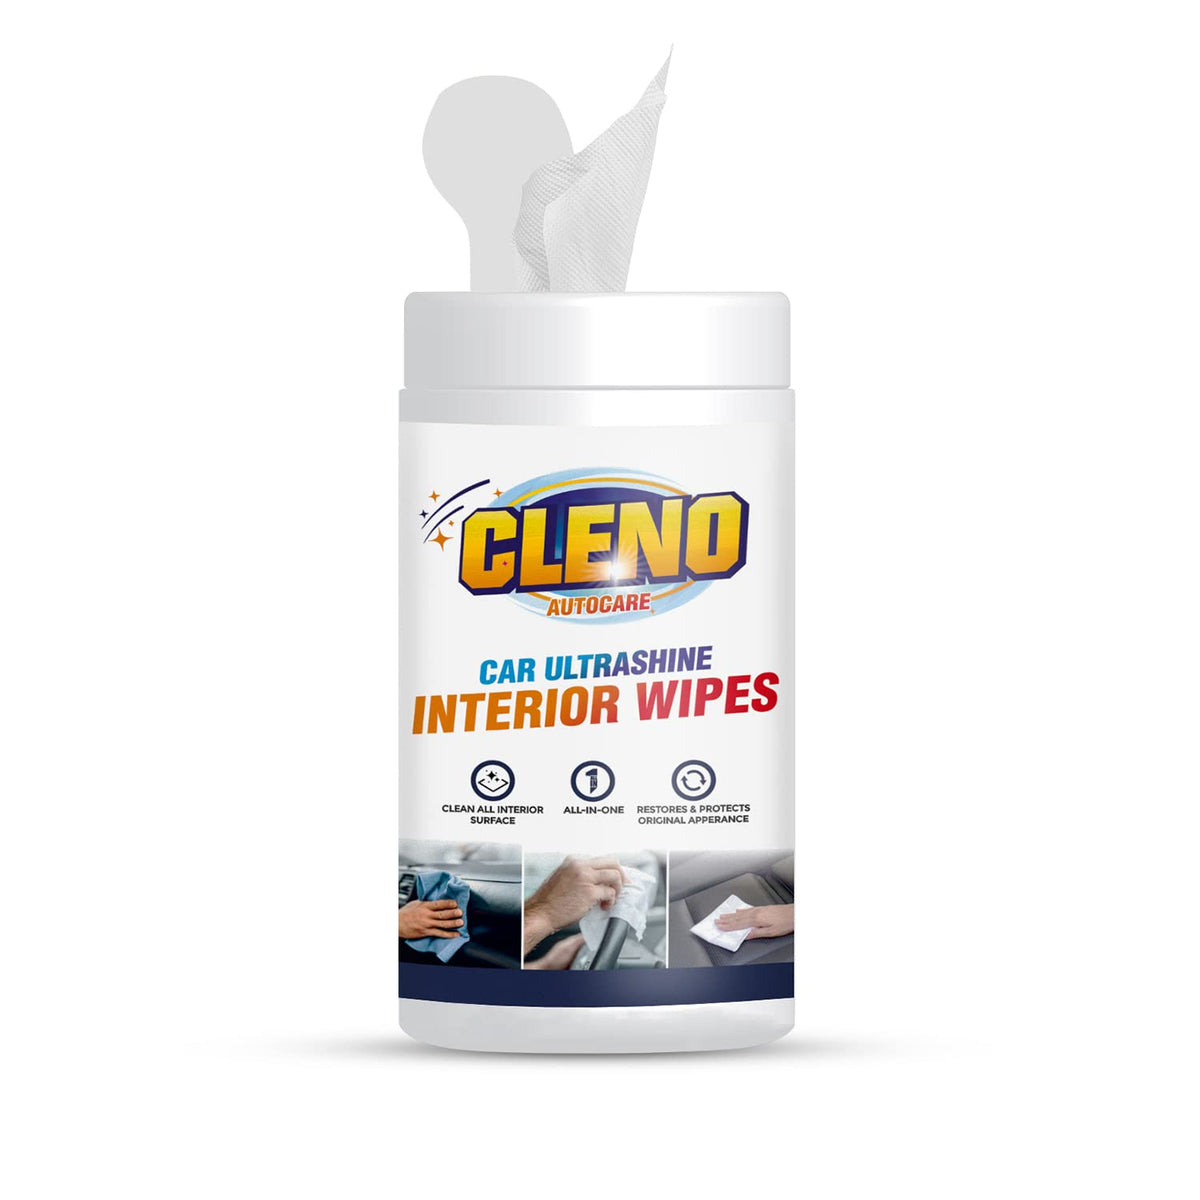 Cleno Car Ultrashine Interior Wipes|Clean All Car Interior Surface, Restores and Projects Original Appearance– 50 – Wipes (Ready to Use)